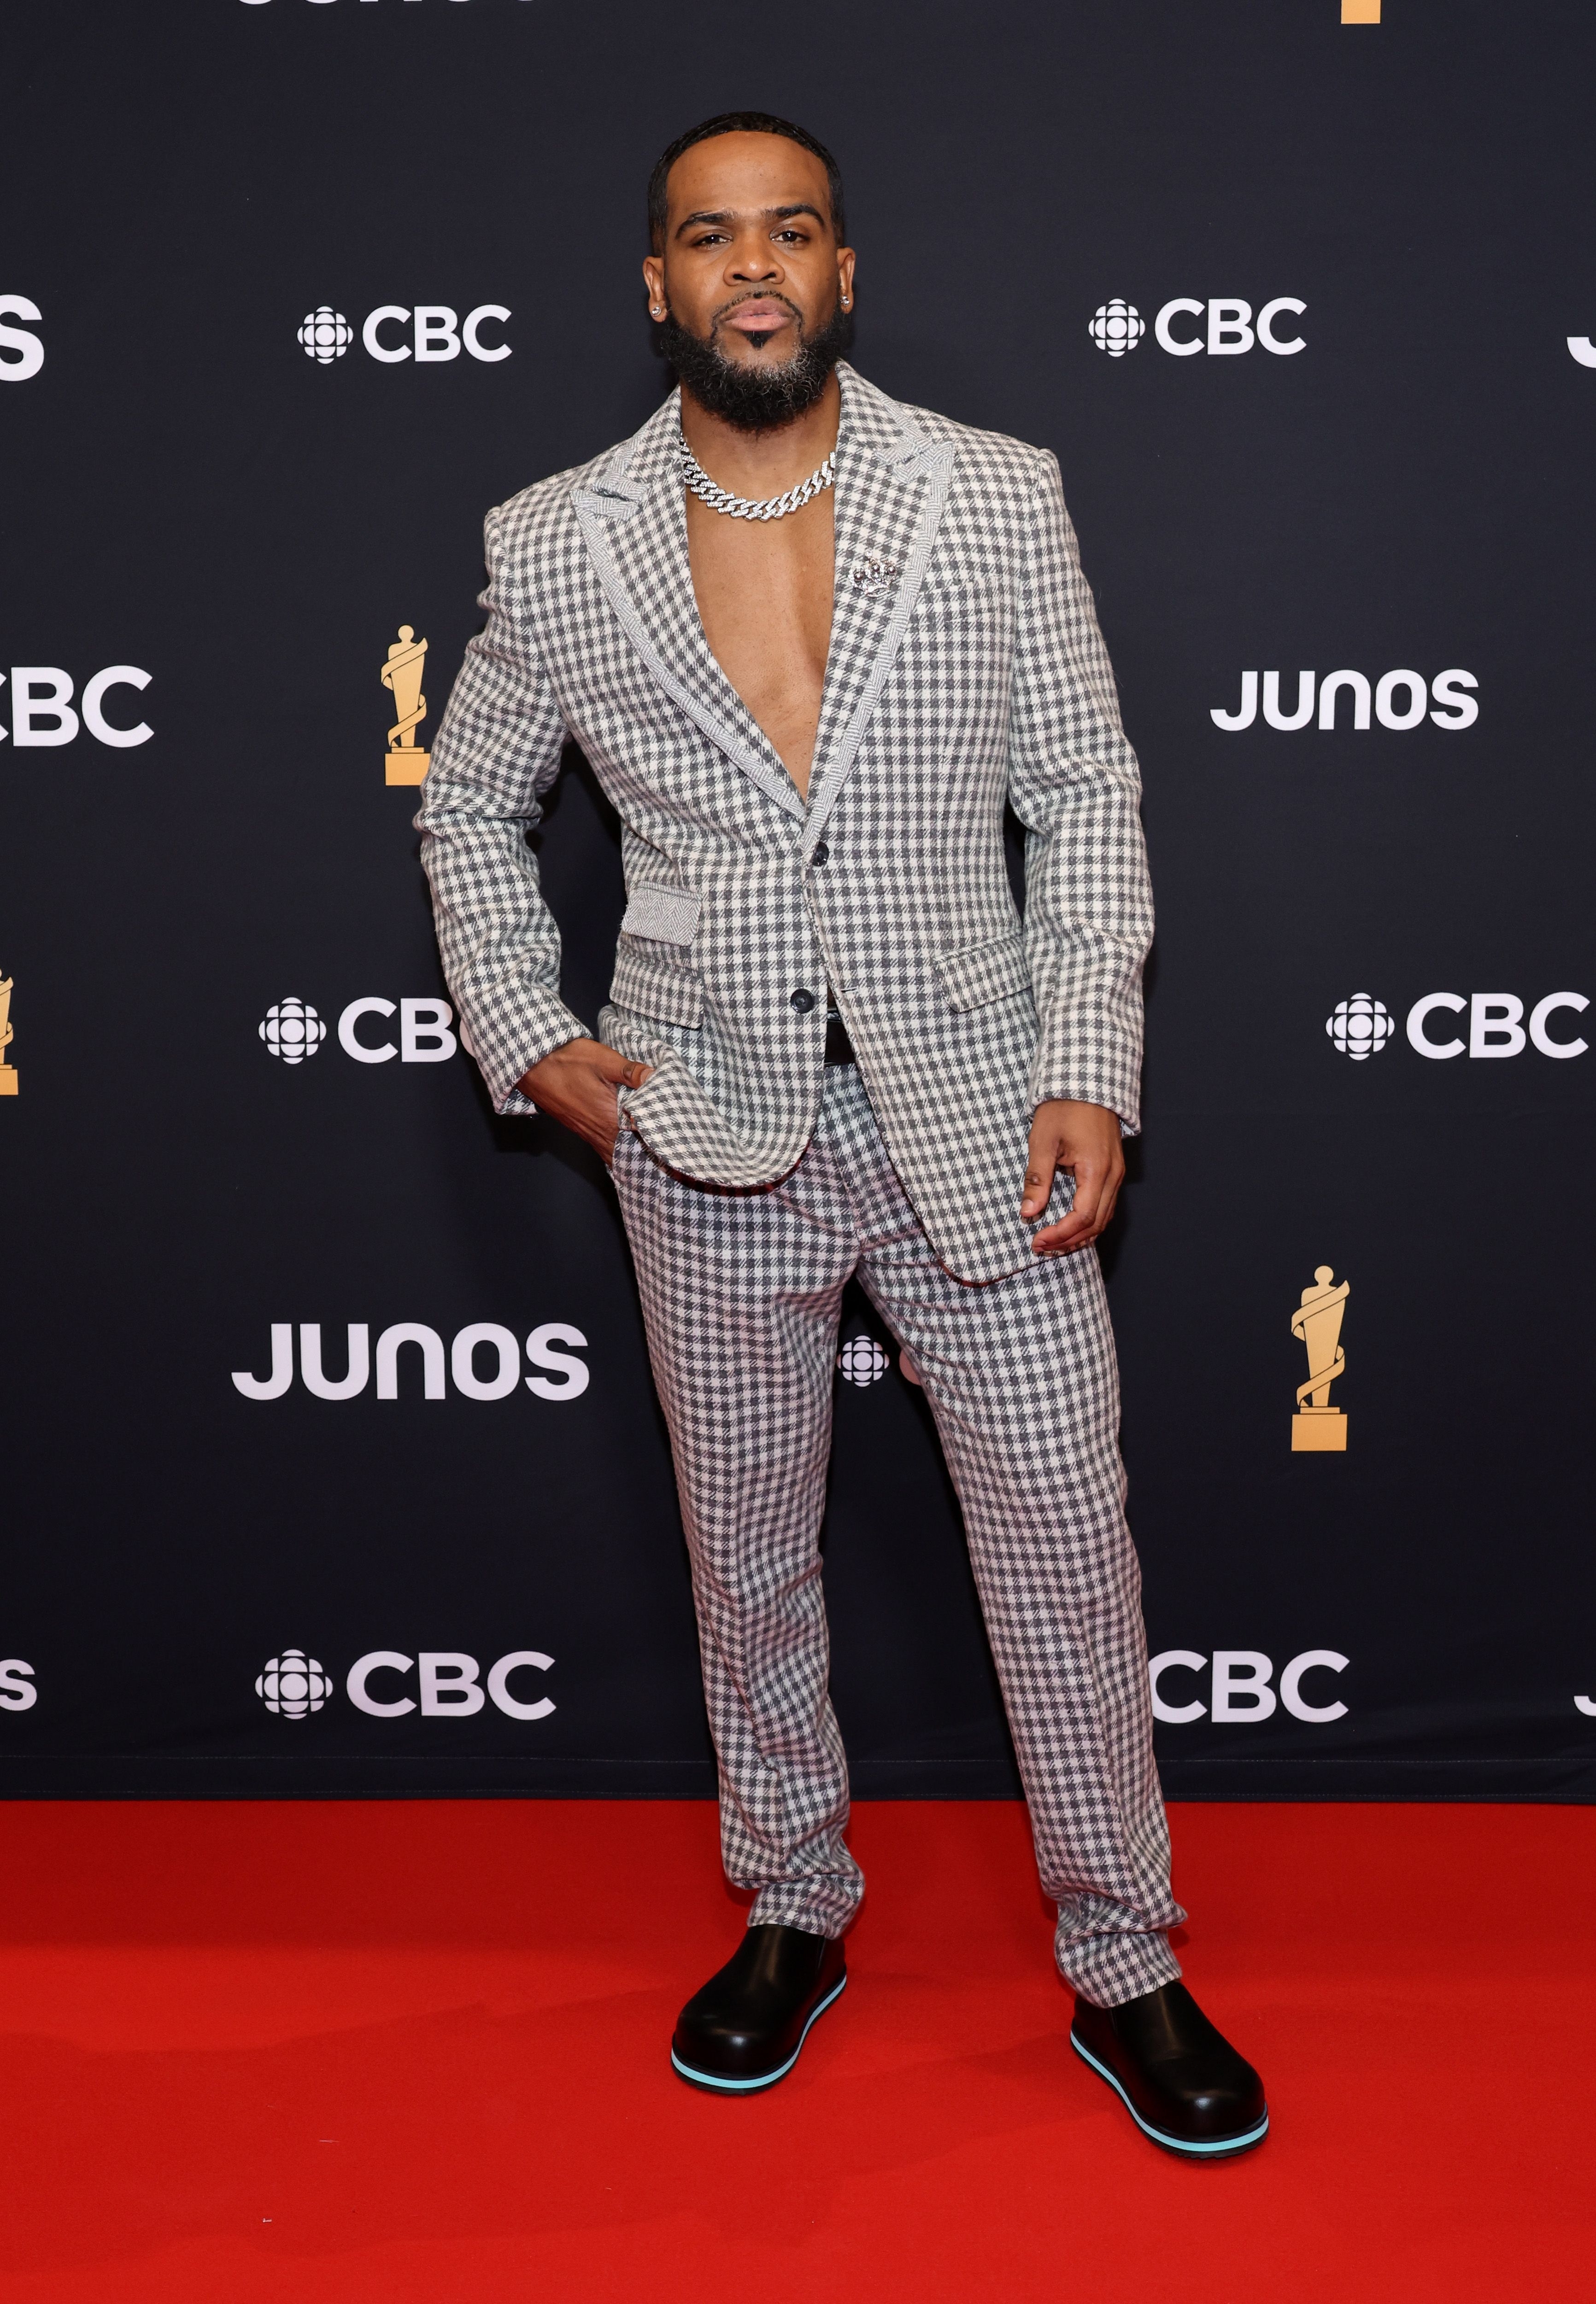 Man in patterned suit poses with hand in pocket at the JUNOS event